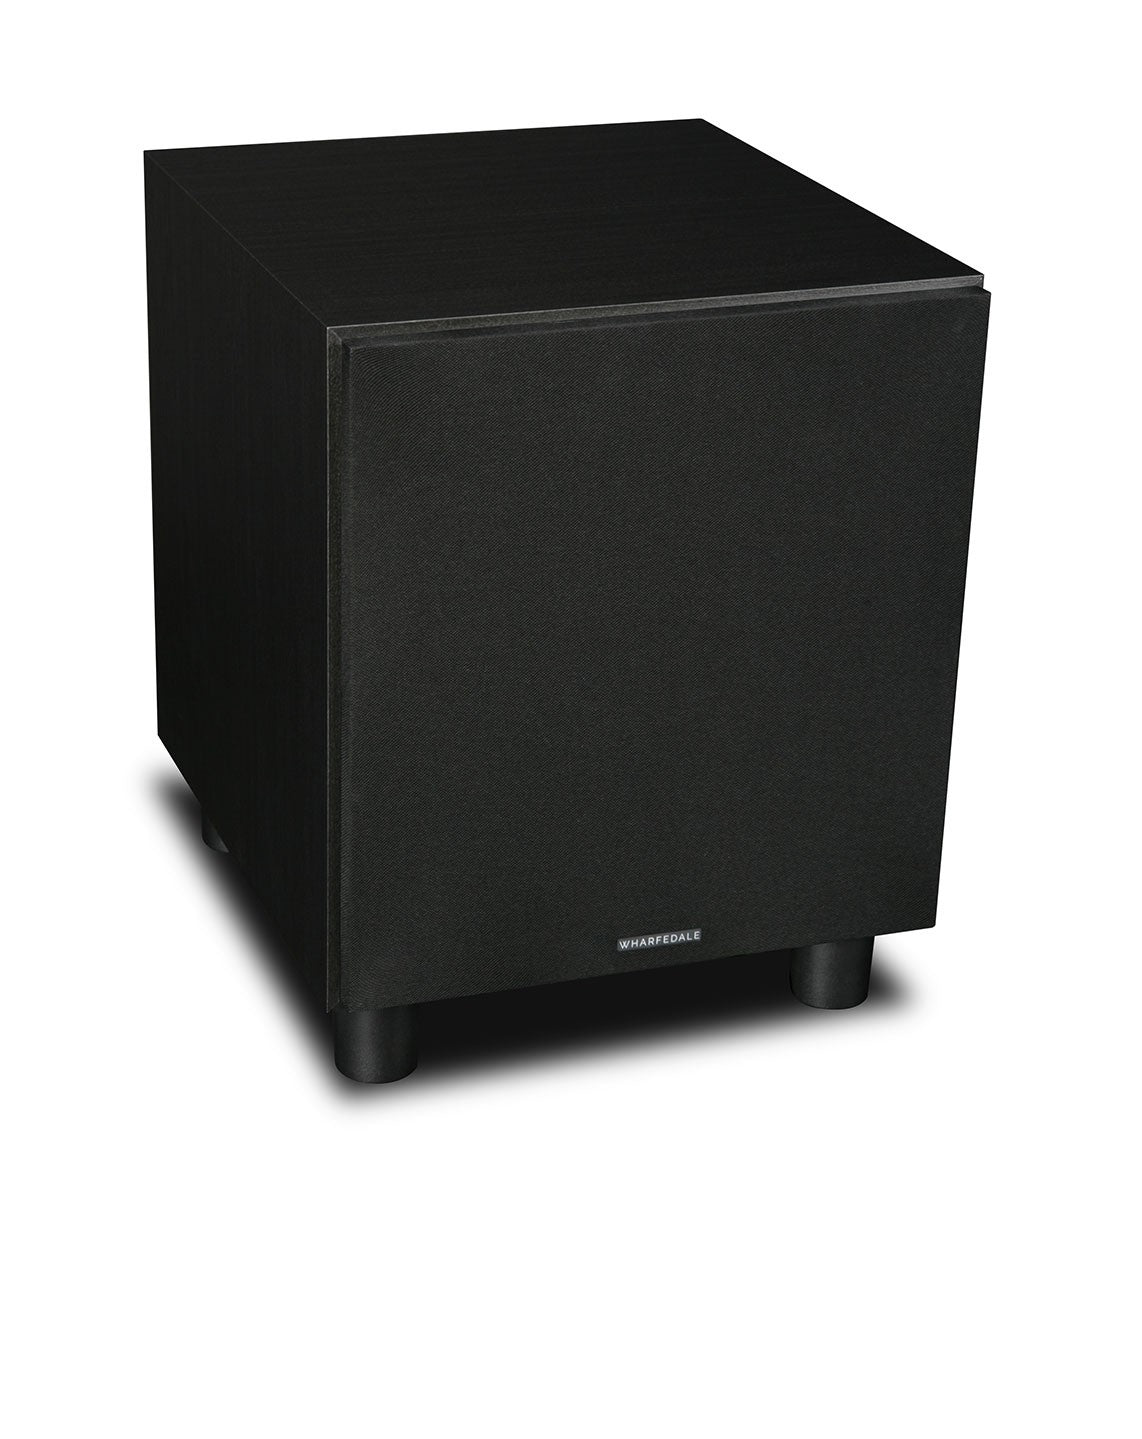 Wharfedale SW-10 subwoofer